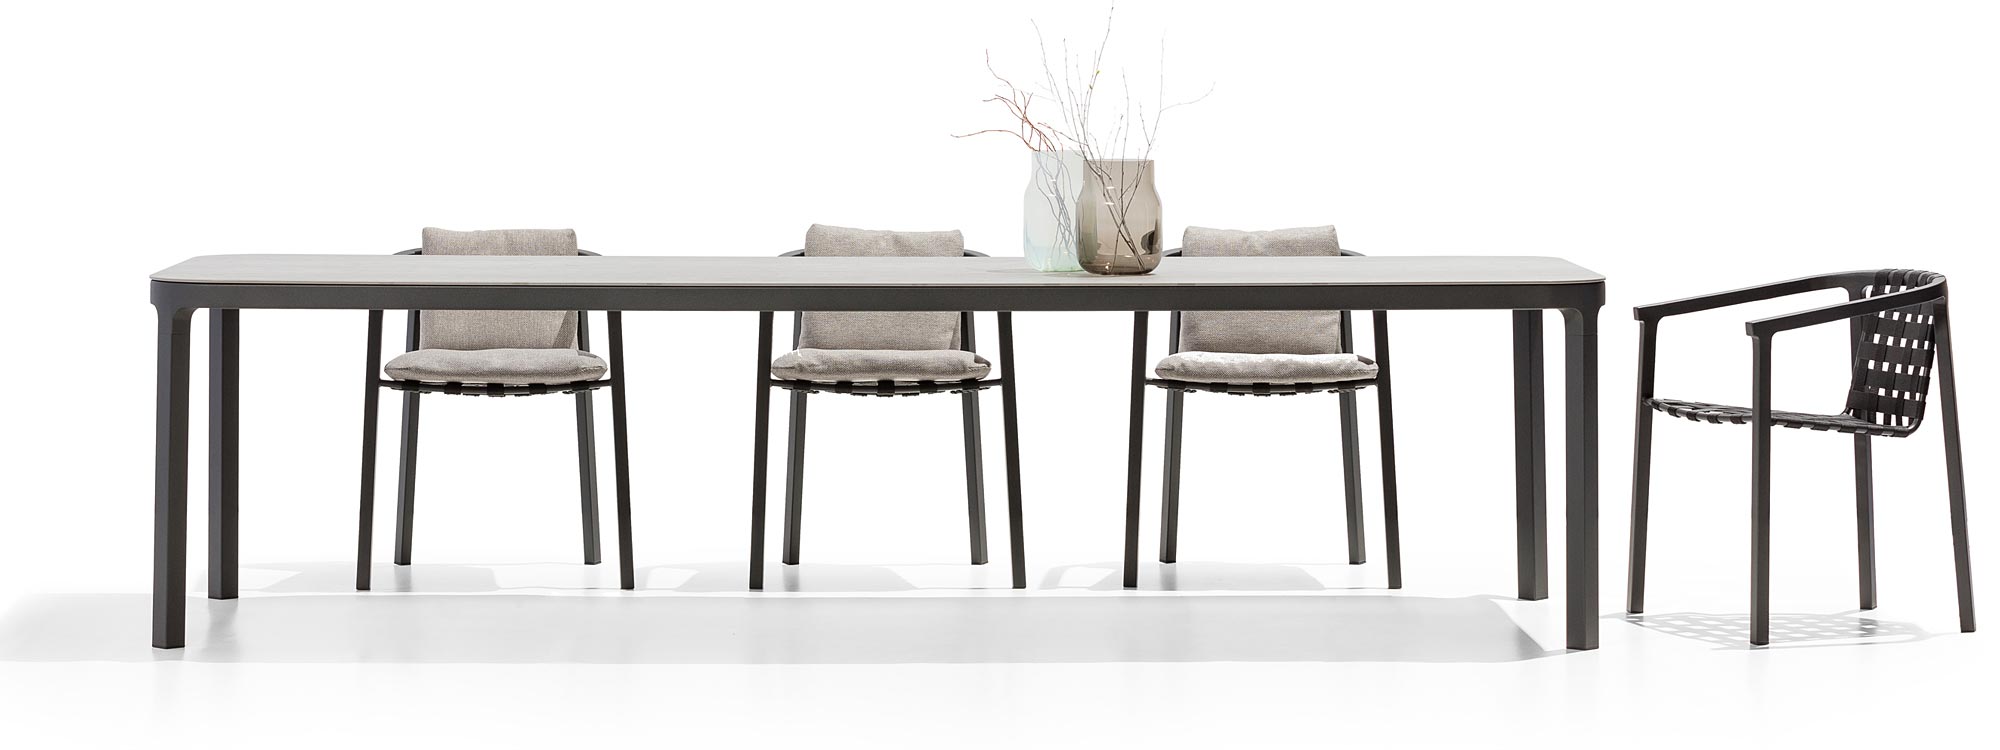 Studio shot of Duct outdoor dining furniture designed by Studio Segers for Todus